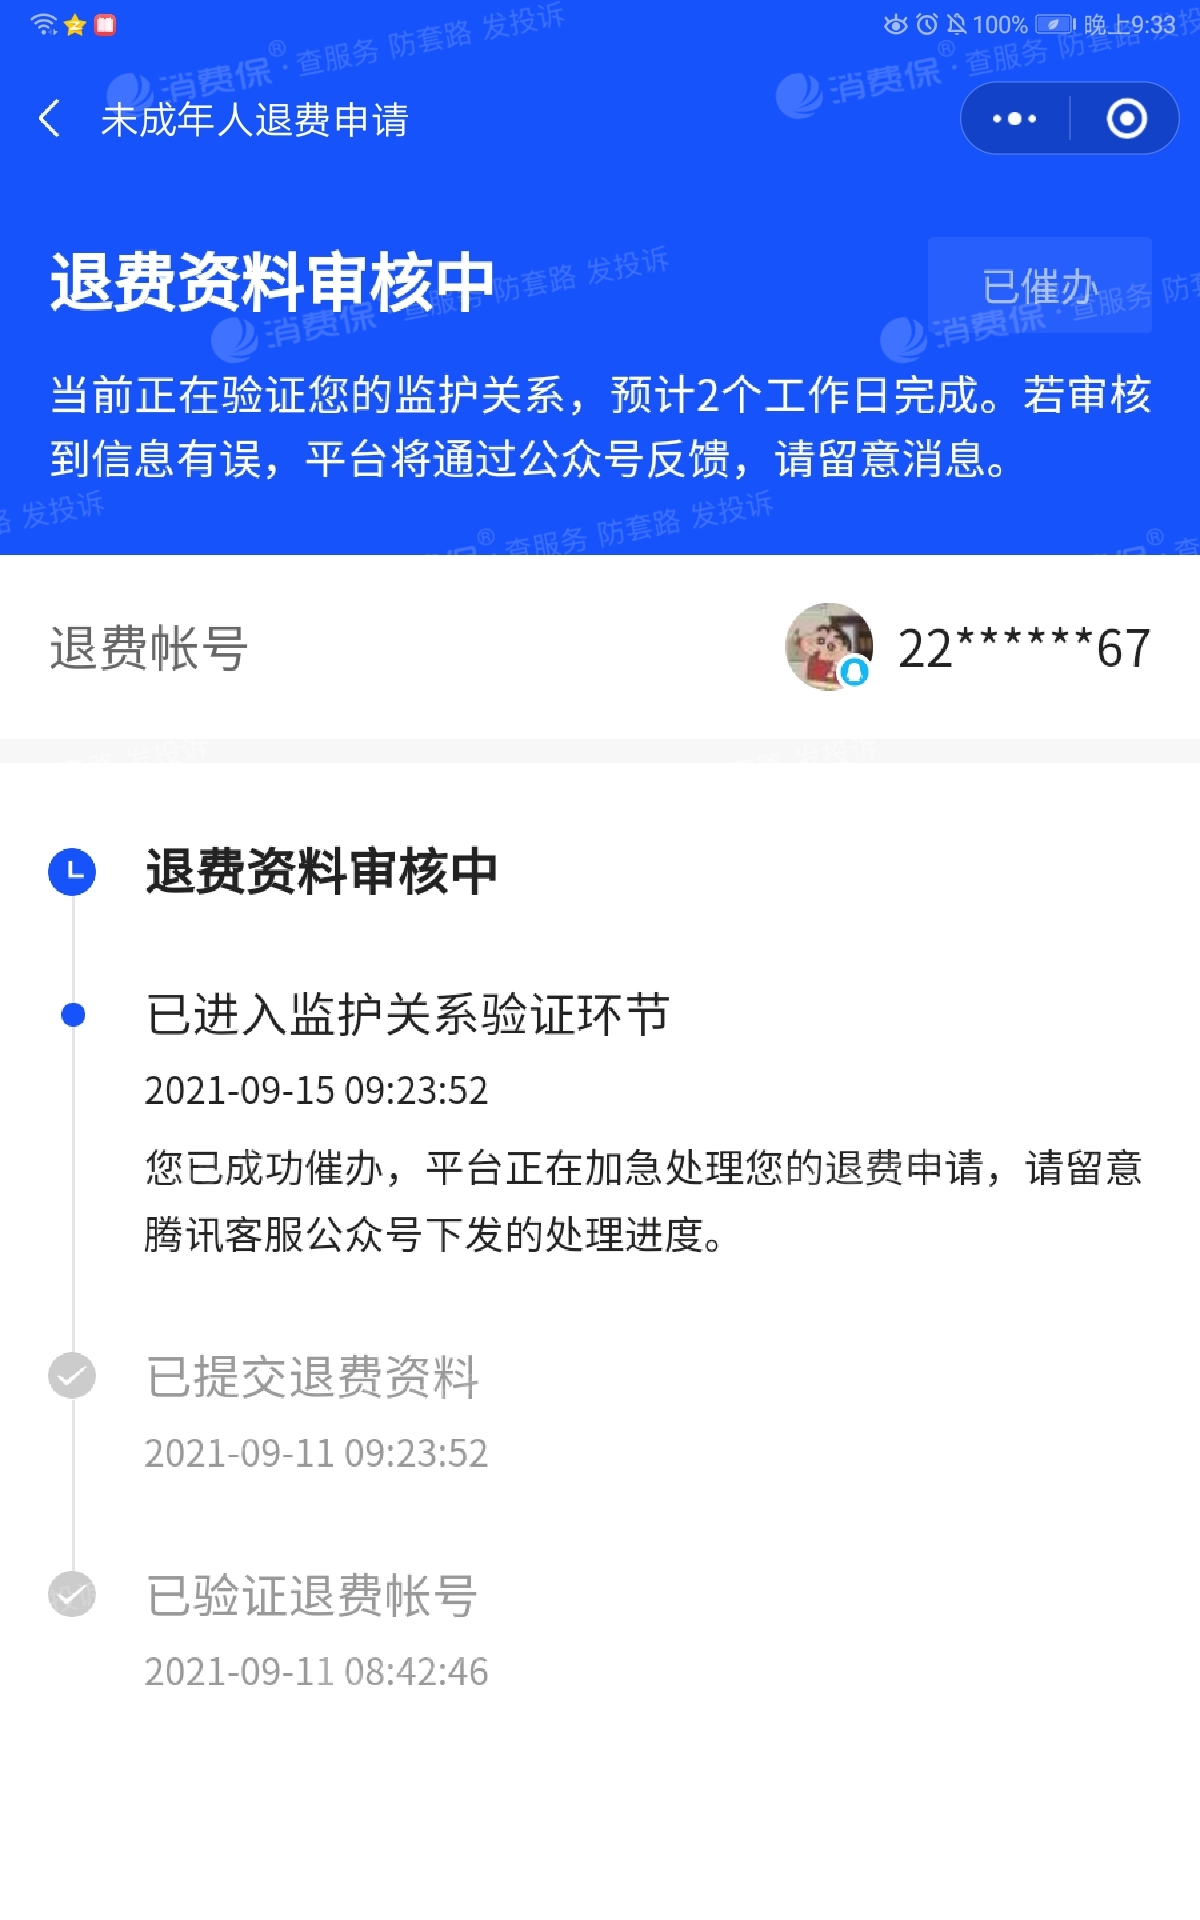 Where is the Tencent Server Game Center_What compensation does Tencent Games have for shutting down the server_Tencent Games shutting down the server